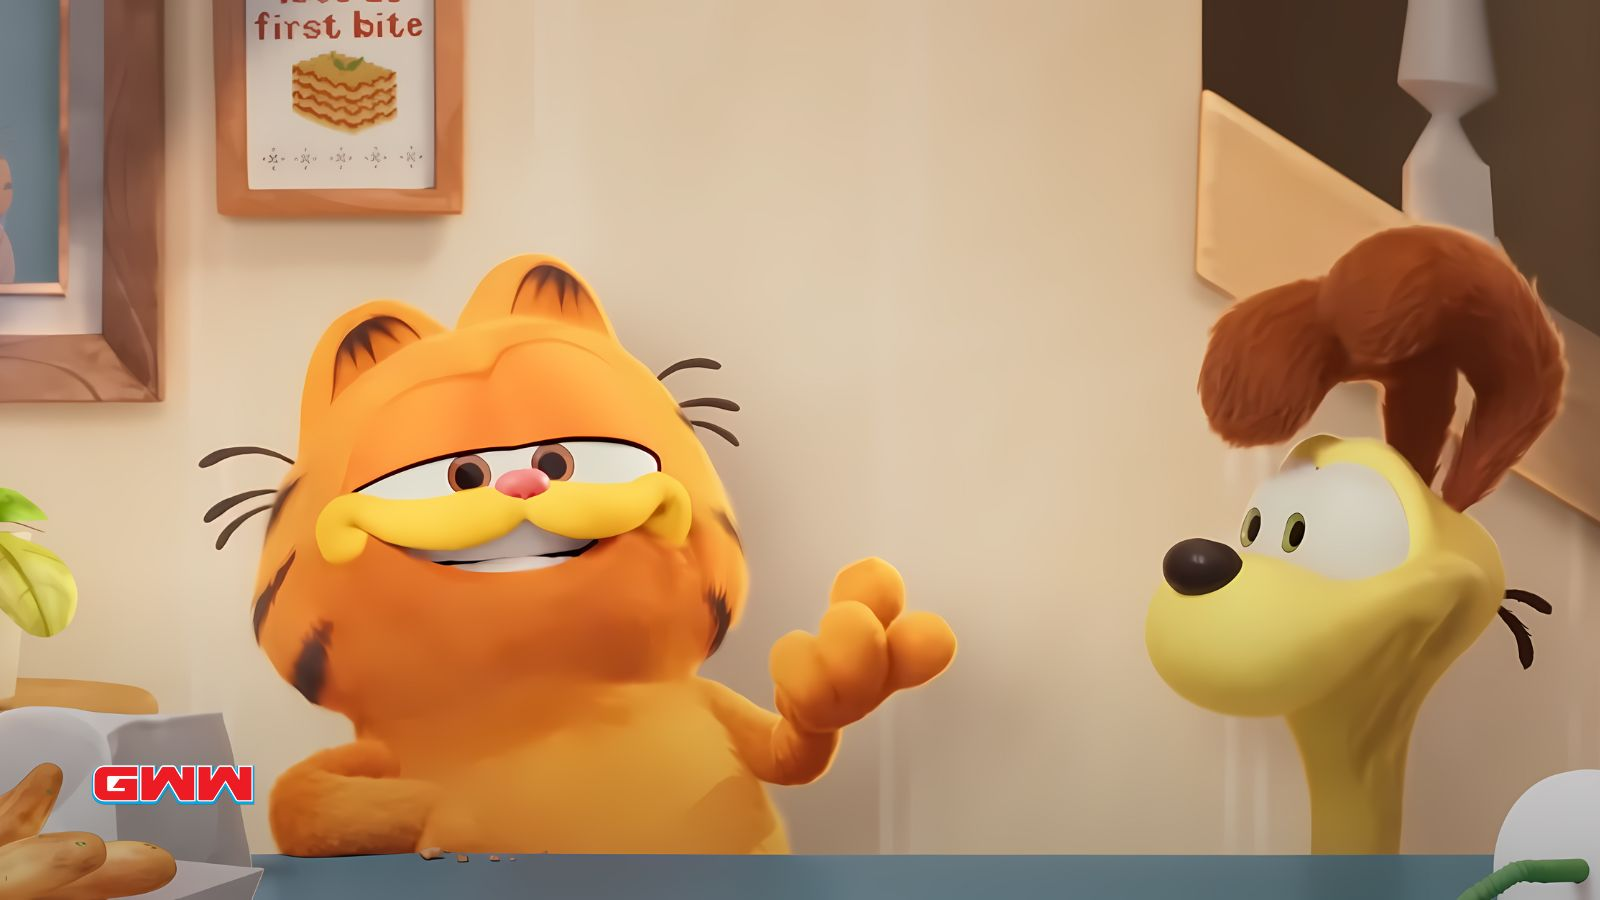 Garfield conversing with a yellow dog Odie in the kitchen.